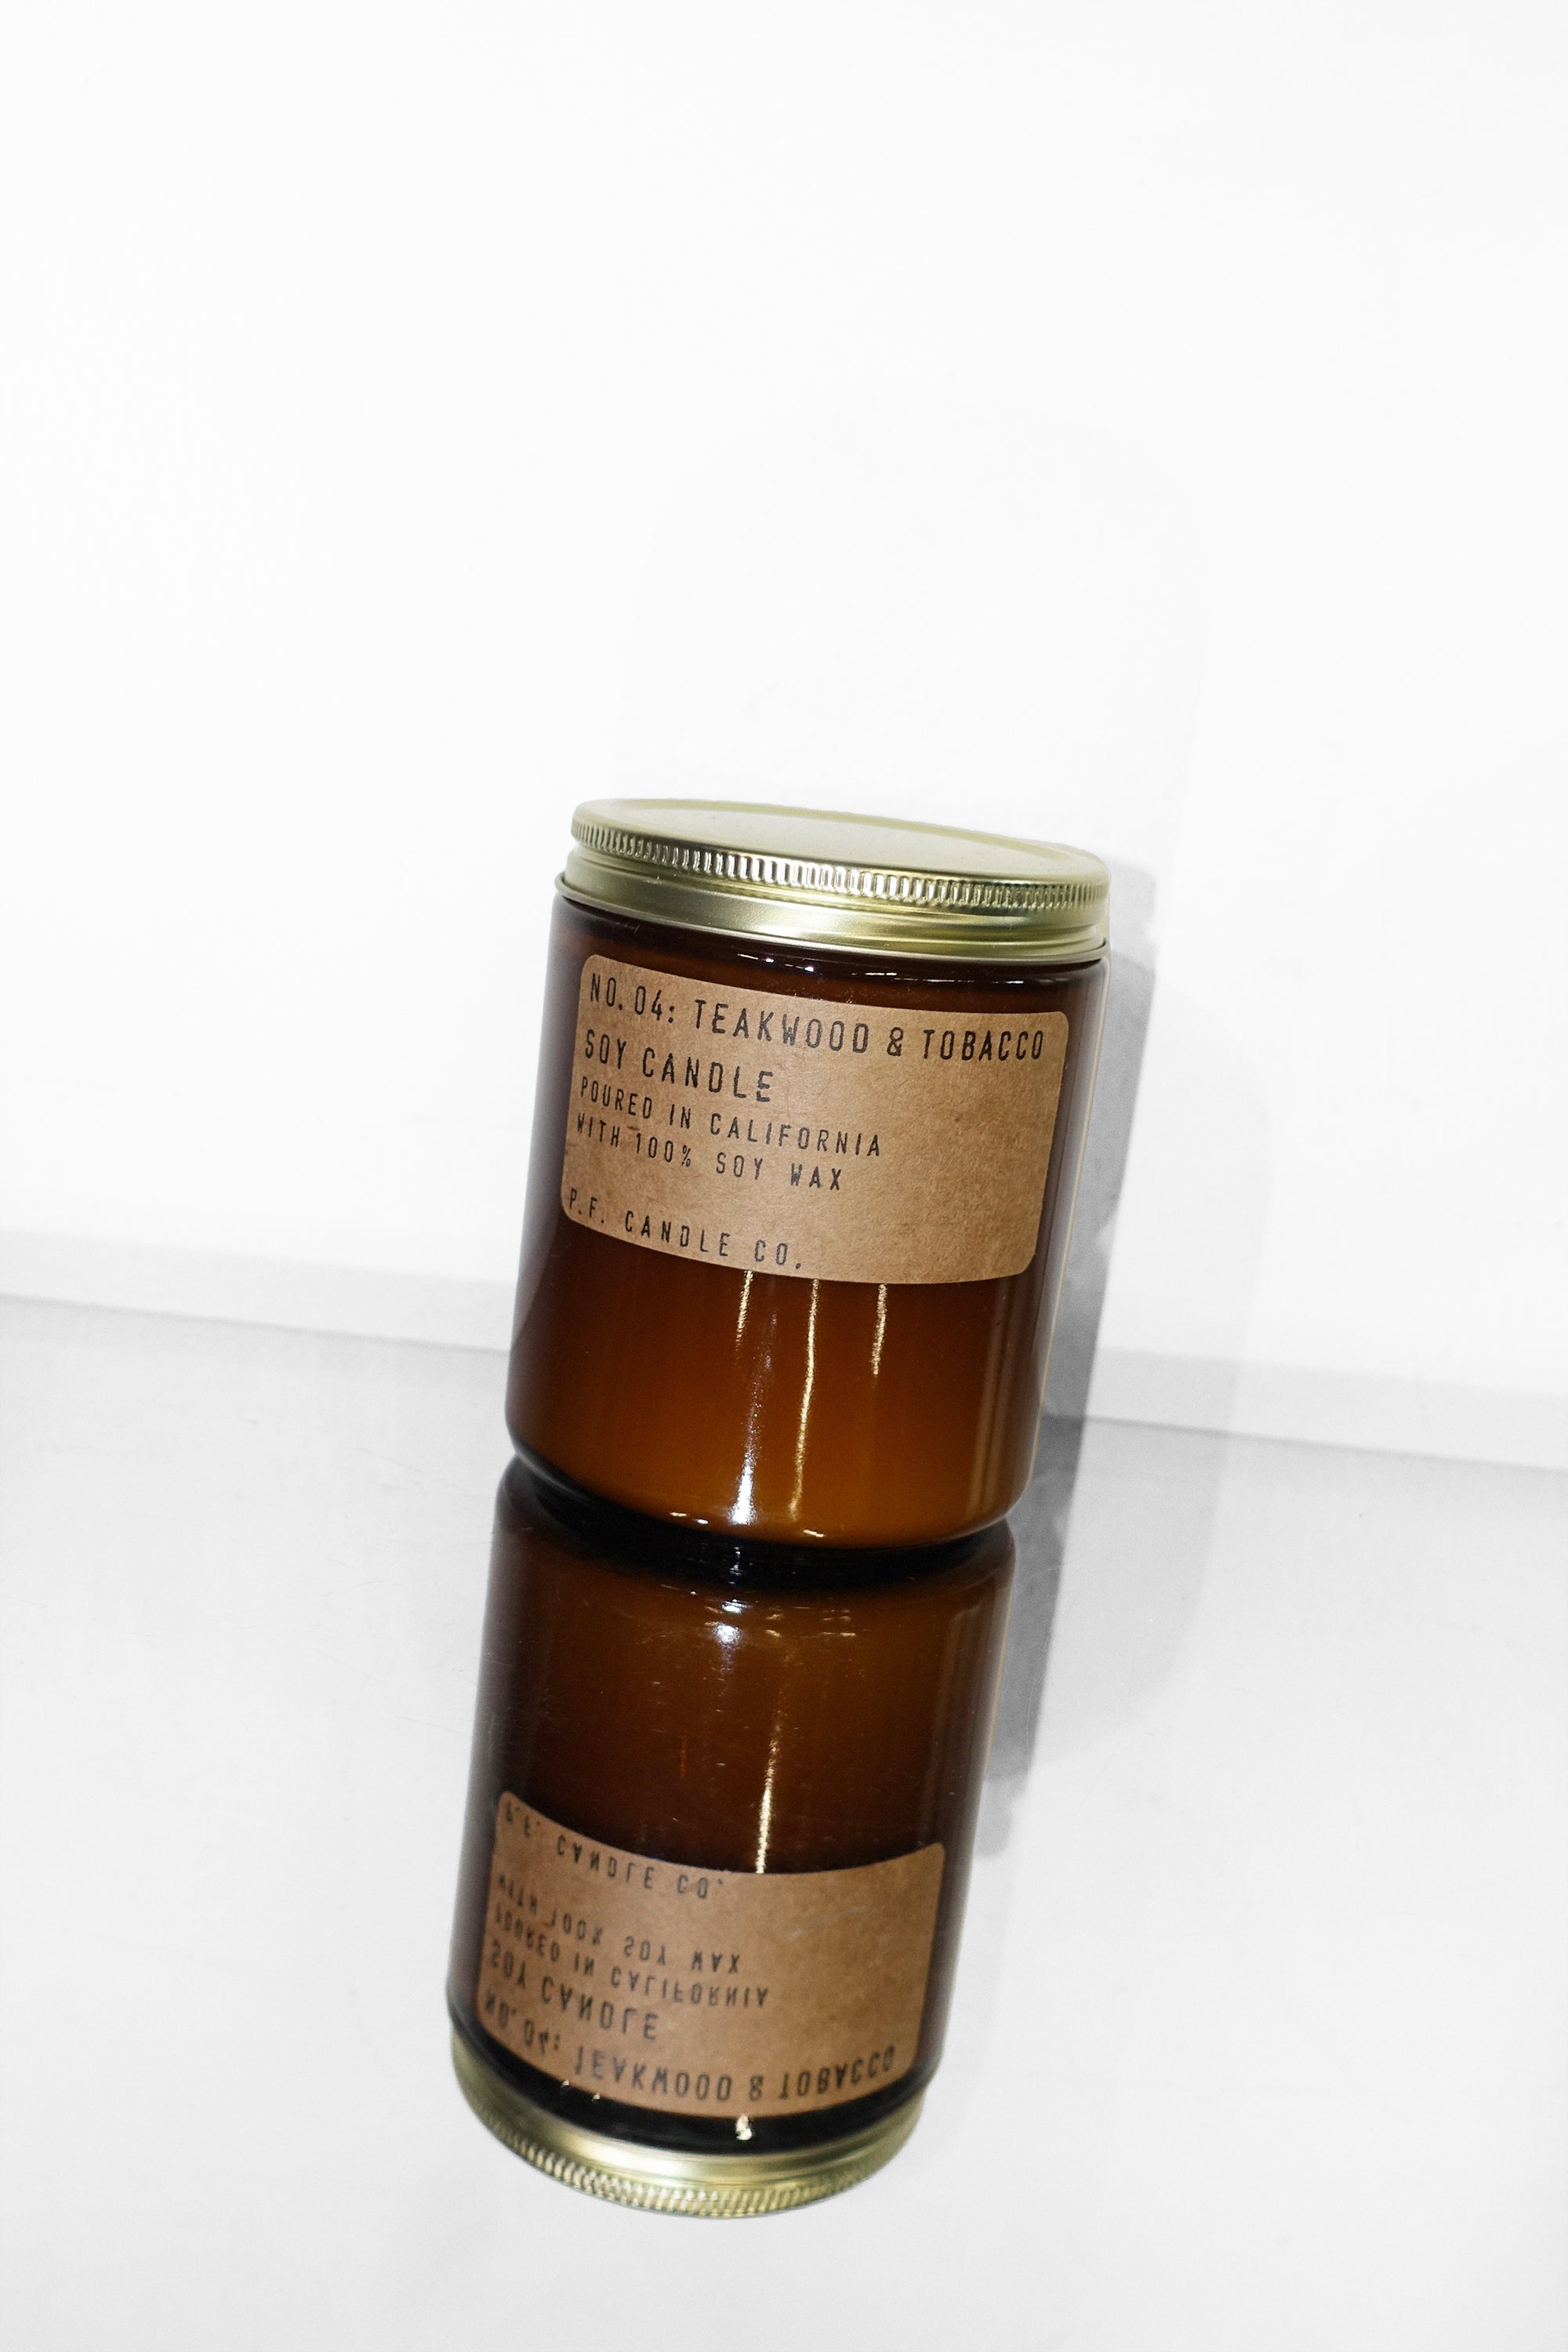 Teakwood & Tobacco Candle: 7.2oz by PF Candle Co.